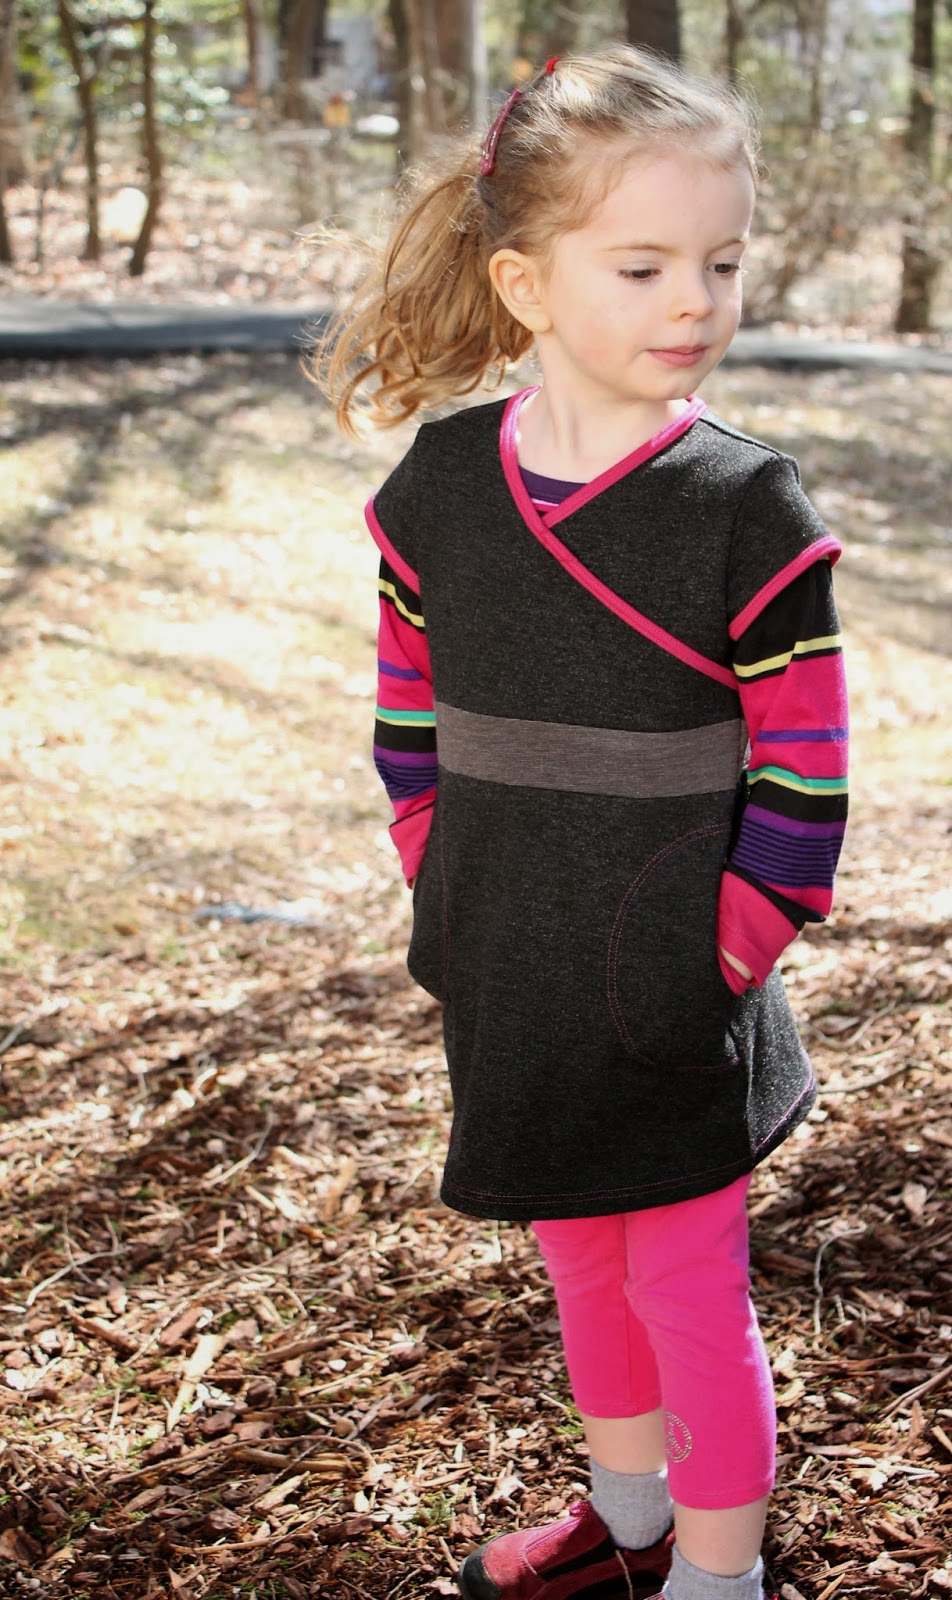 Sewing the Princess Castle Tunic and Raglan Tee from Ottobre Design 4/2013 | The Inspired Wren